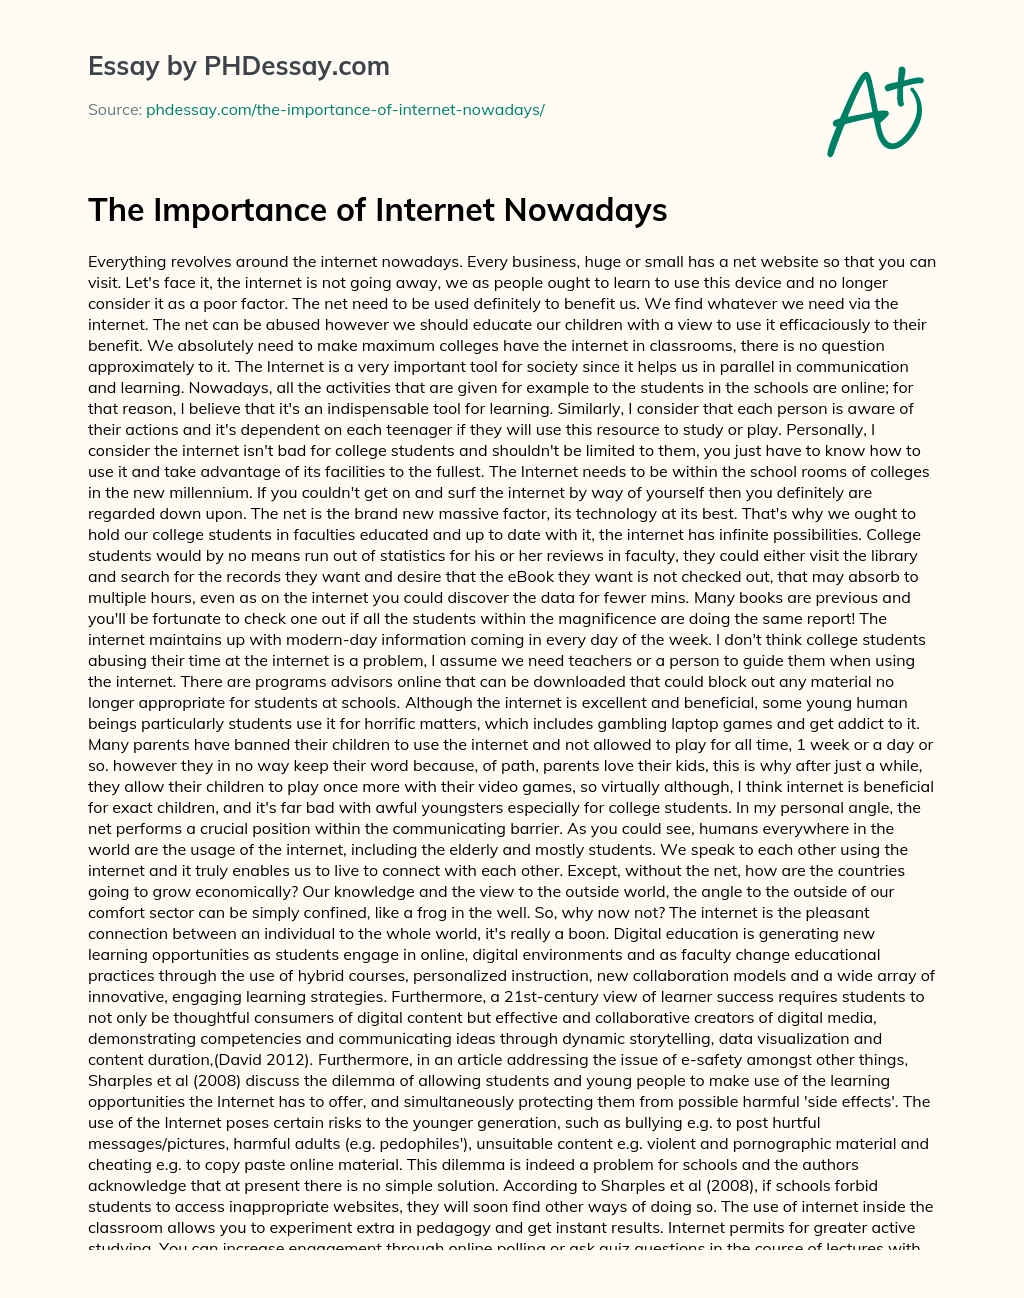 The Importance of Internet Nowadays essay